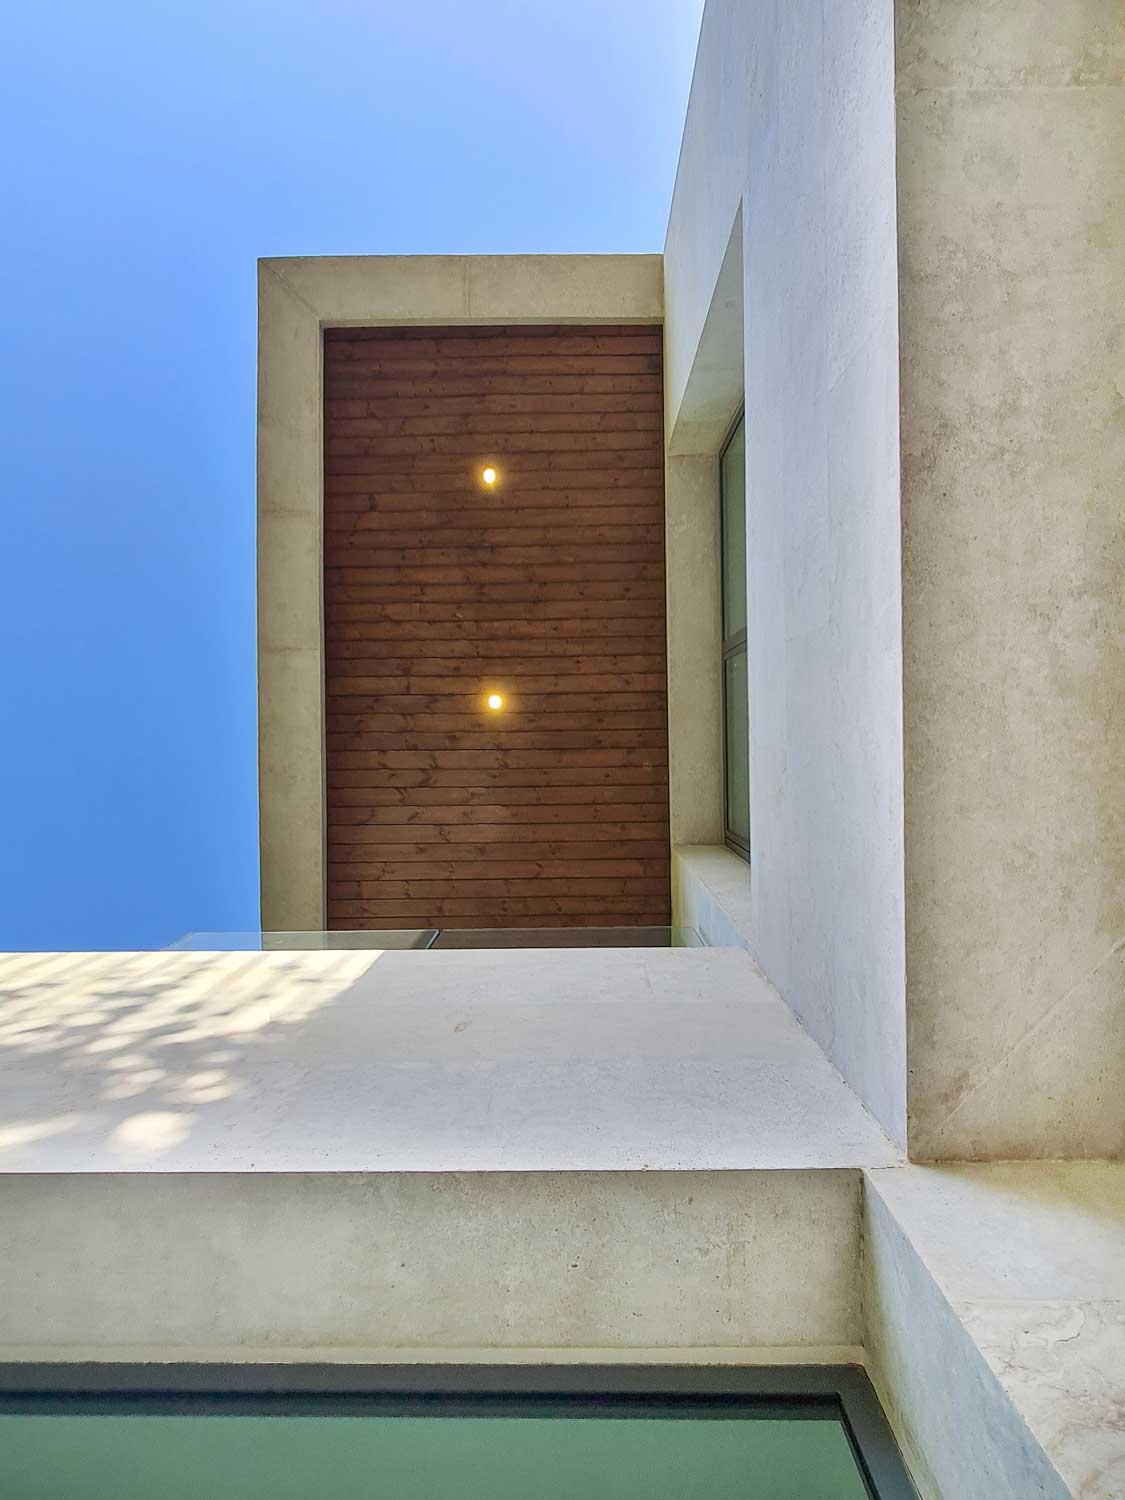 picture no. 7 ofVilla No 10 project, designed by Ahmad Ghodsimanesh & Partners